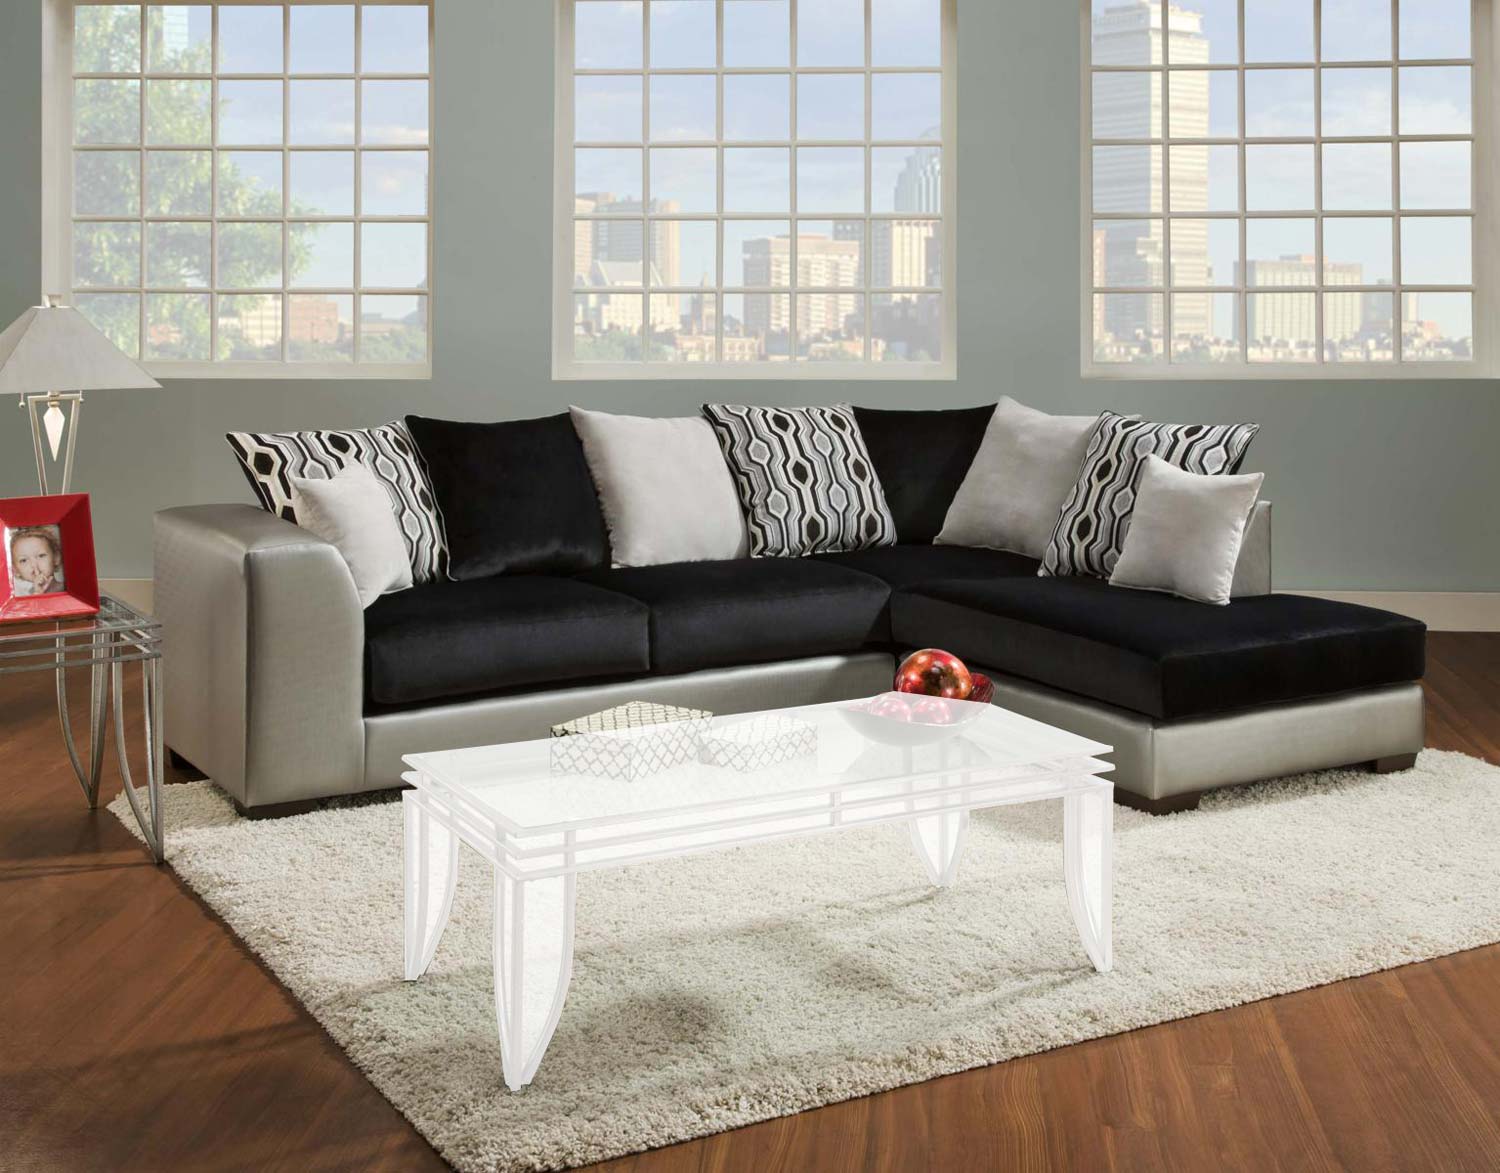 Chelsea Home Sigma 2 Piece Sectional Sofa - Shimmer Silver/Implosion Black